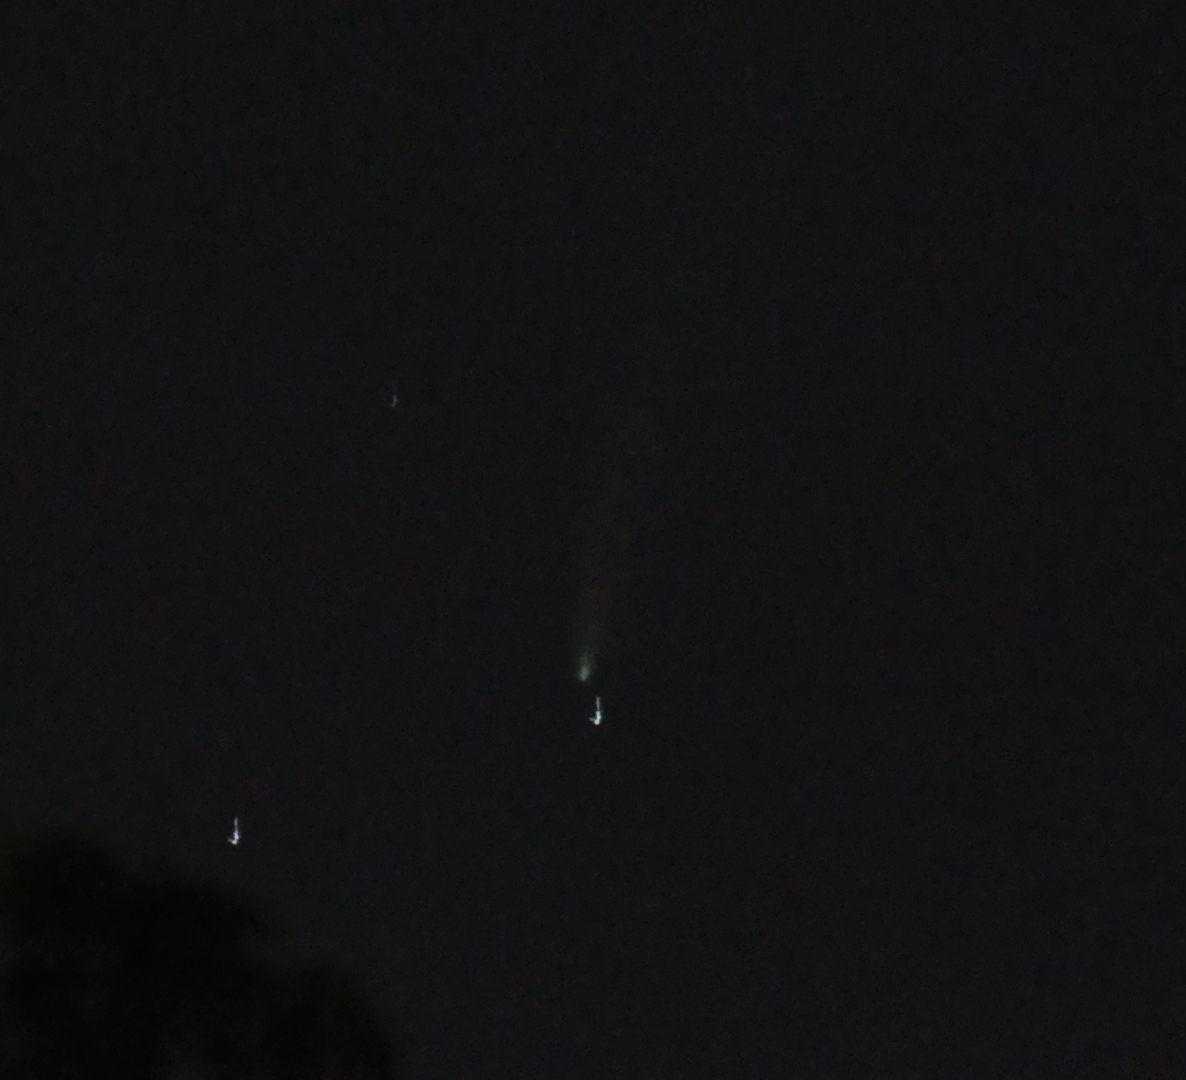 low-quality photo of the C/2020 F3 (NEOWISE) comet